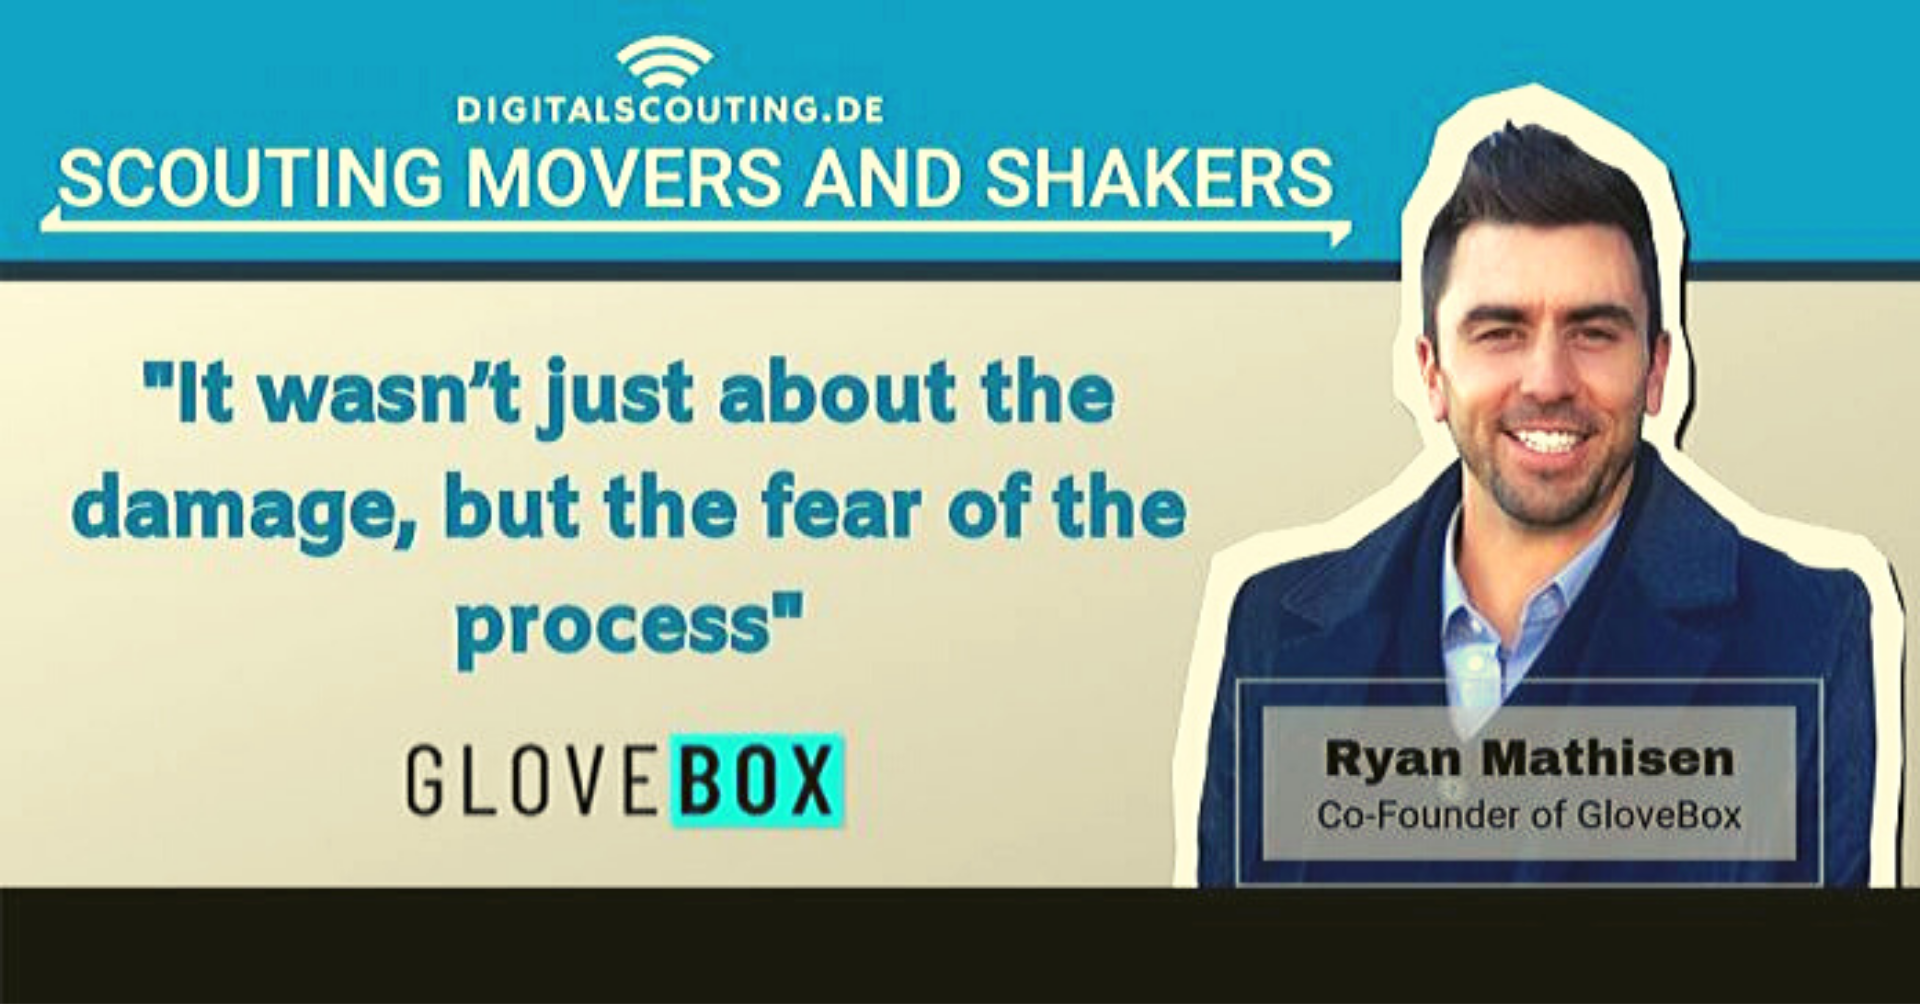 Exclusive Announcement on Digitalscouting: "It wasn’t just about the damage, but the fear of the process" Ryan Mathisen, Co-Founder of GloveBox